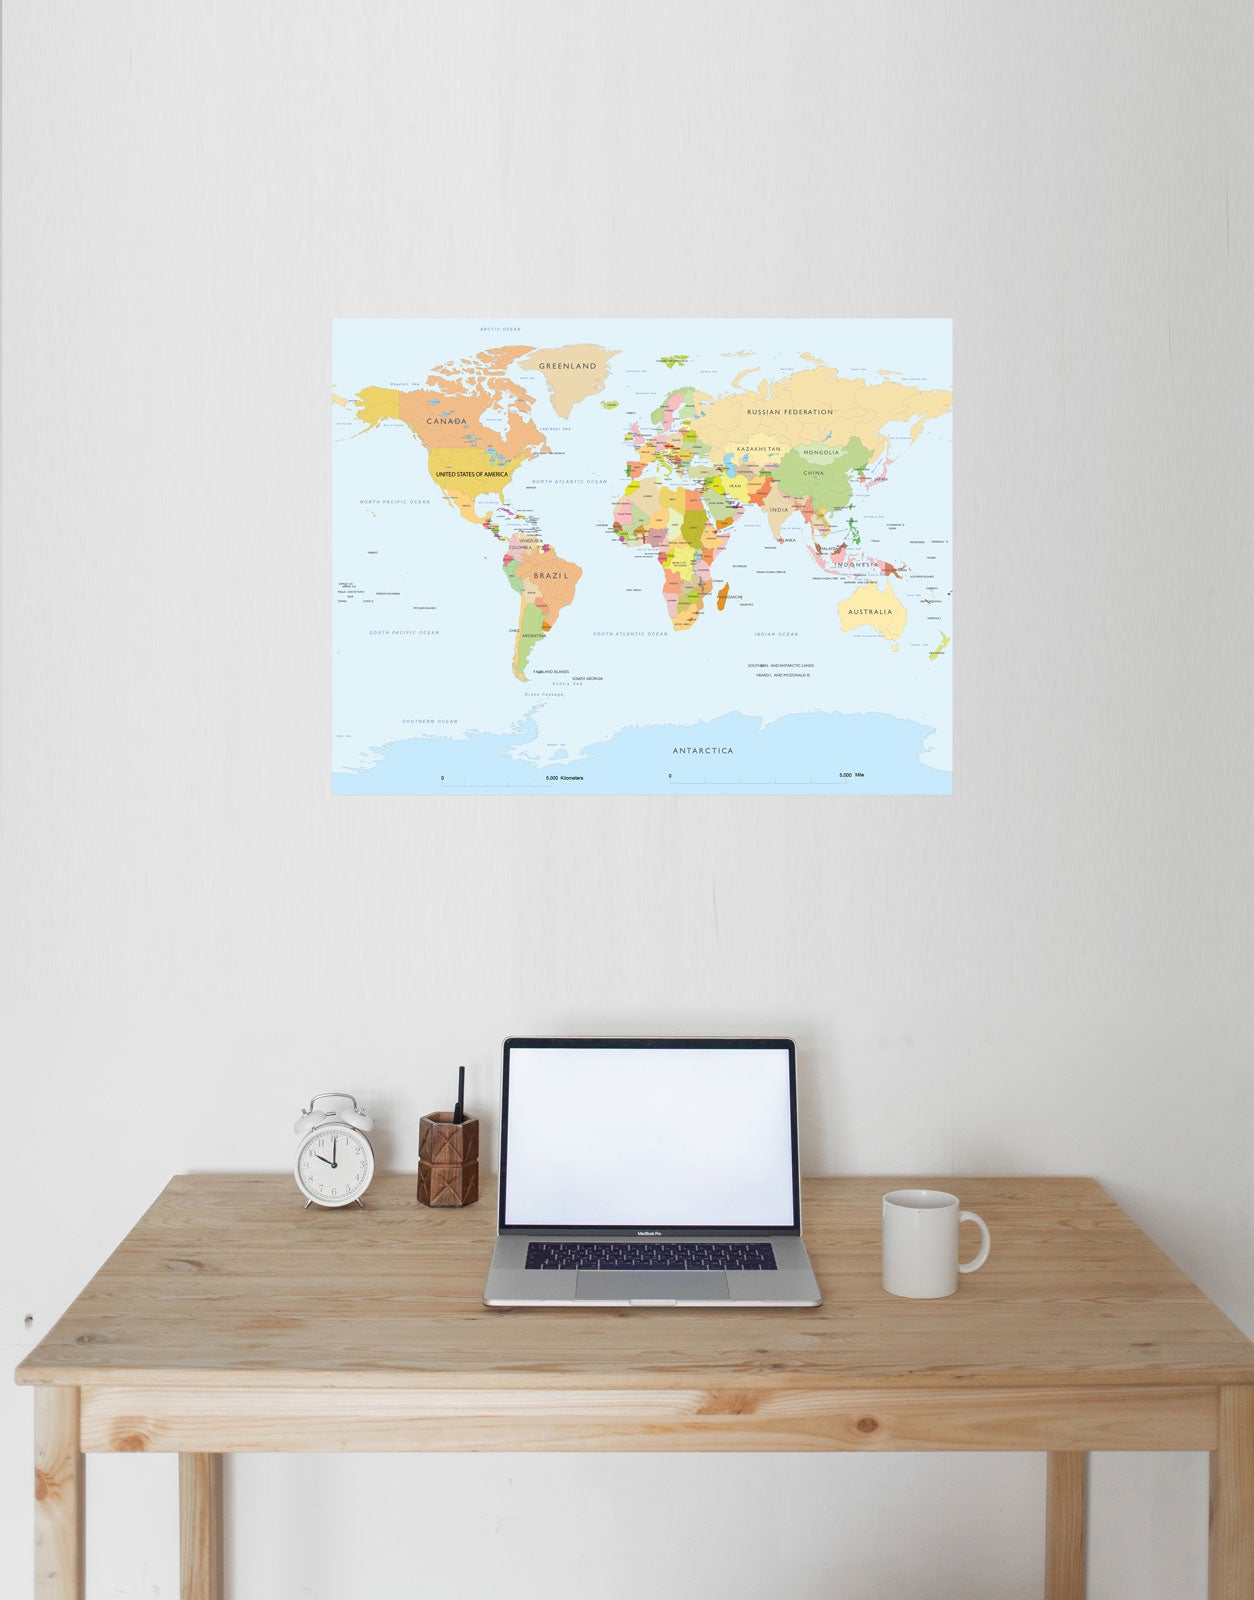 World Map Highly Detailed Fabric Wall Decal - A Creative Hart